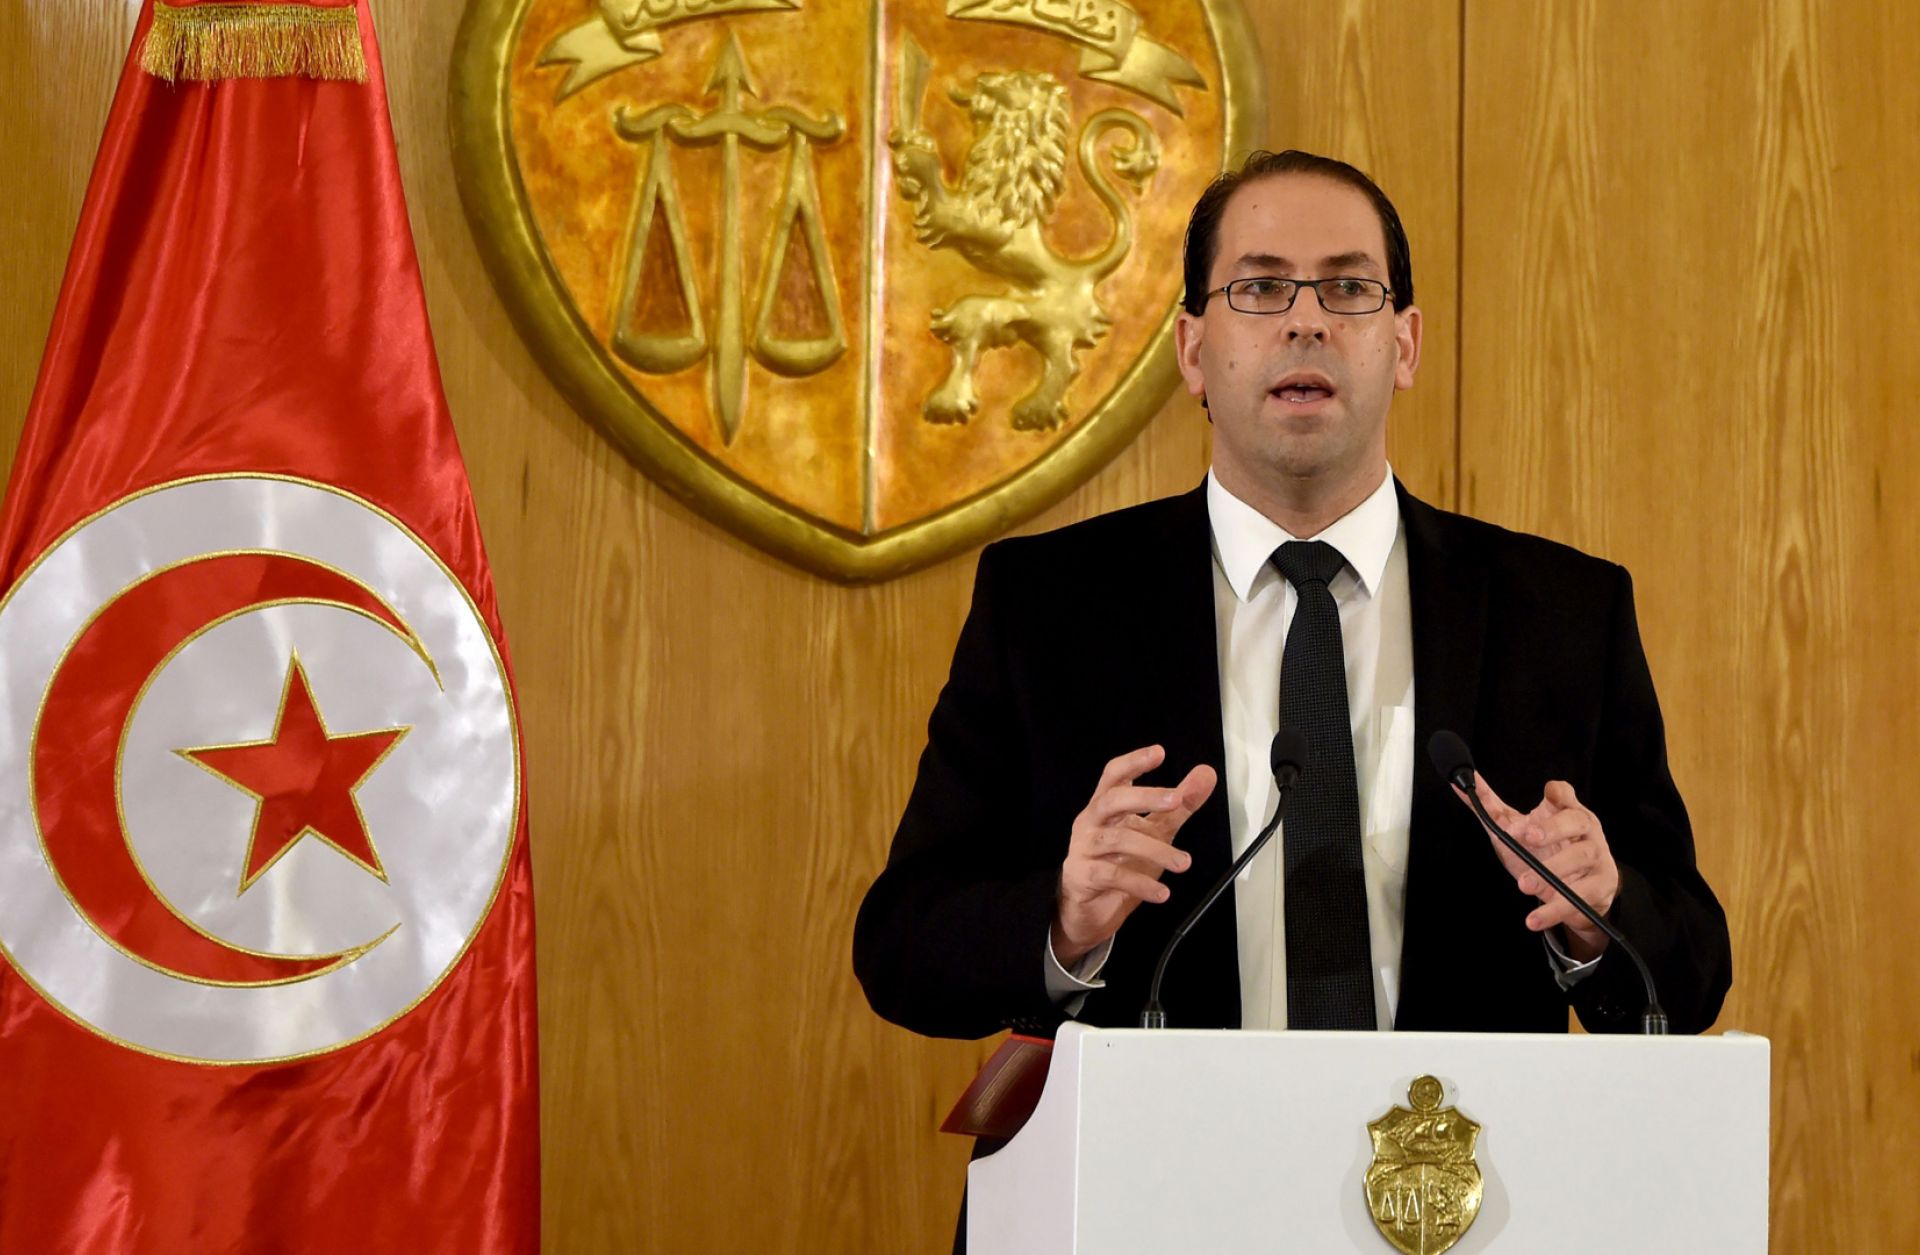 Tunisia's New Leader Chooses a Controversial Cabinet